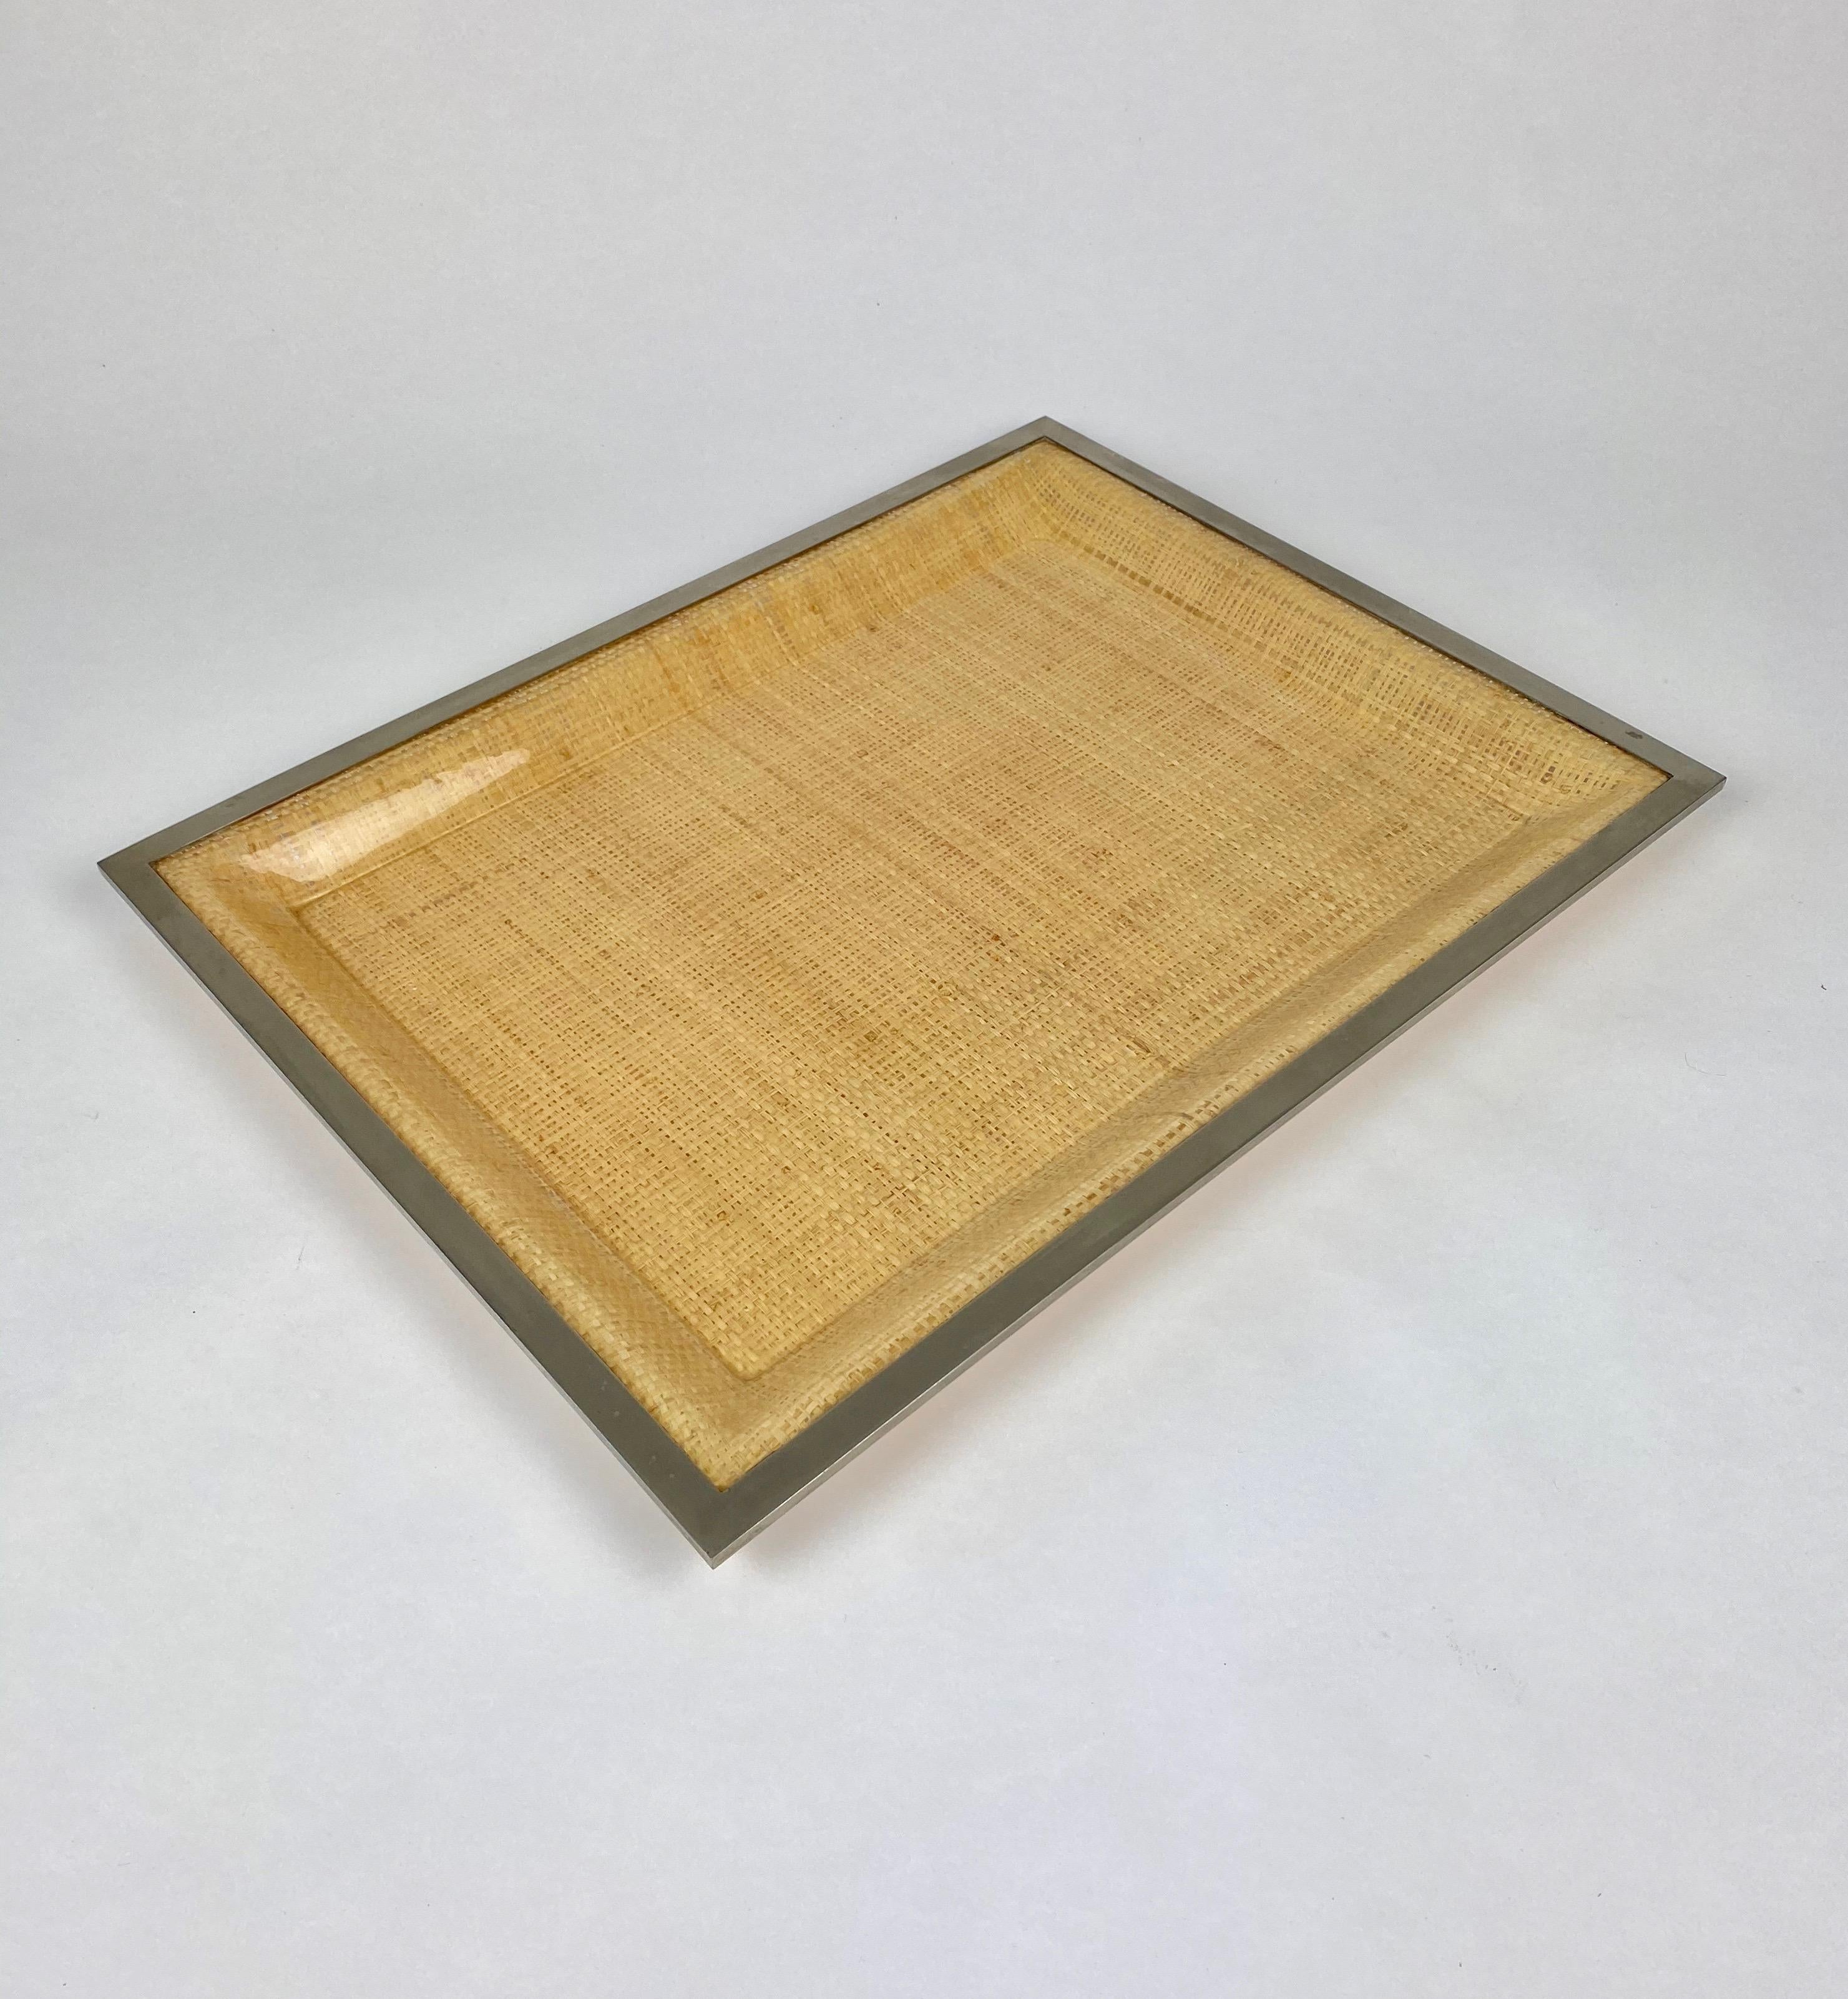 Italian Wicker Lucite Serving Tray Metal Frame by Janetti, Italy, 1970s For Sale